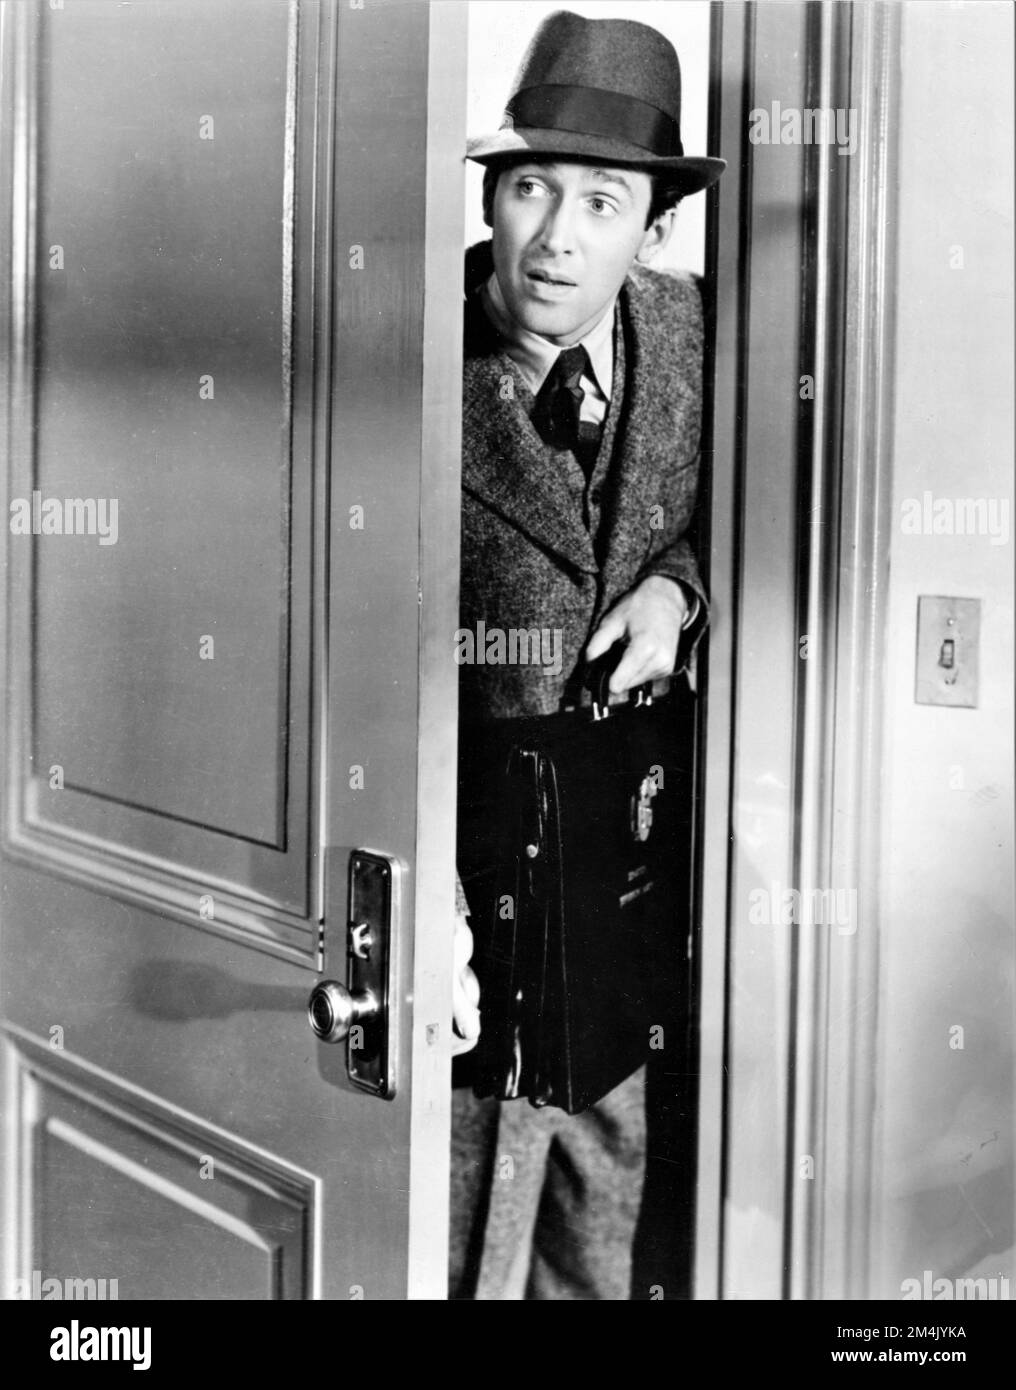 JAMES STEWART in MR. SMITH GOES TO WASHINGTON 1939 director FRANK CAPRA story Lewis R. Foster screenplay Sidney Buchman music Dimitri Tiomkin Columbia Pictures Stock Photo